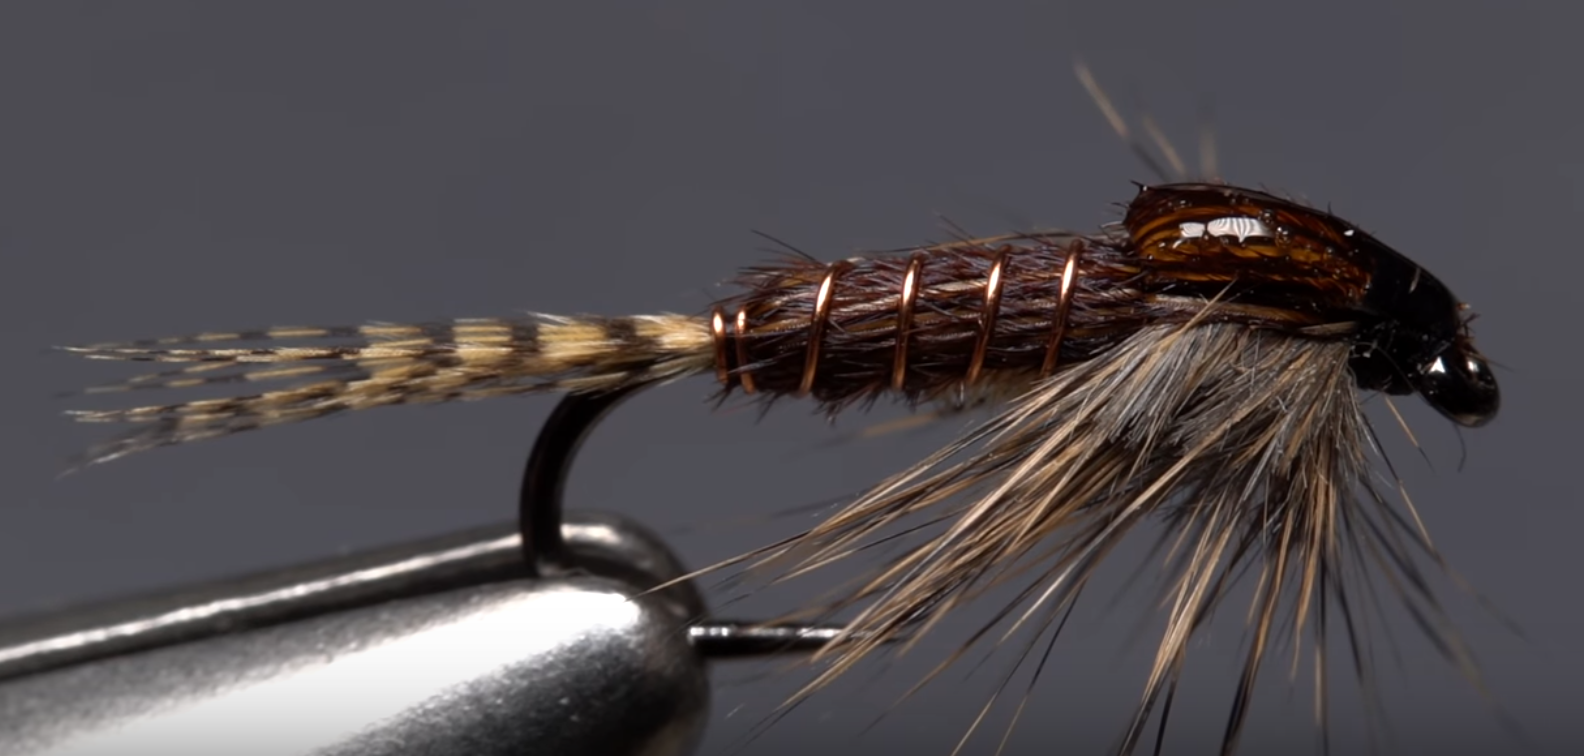 Phat and Phunky Pheasant Tail Nymph